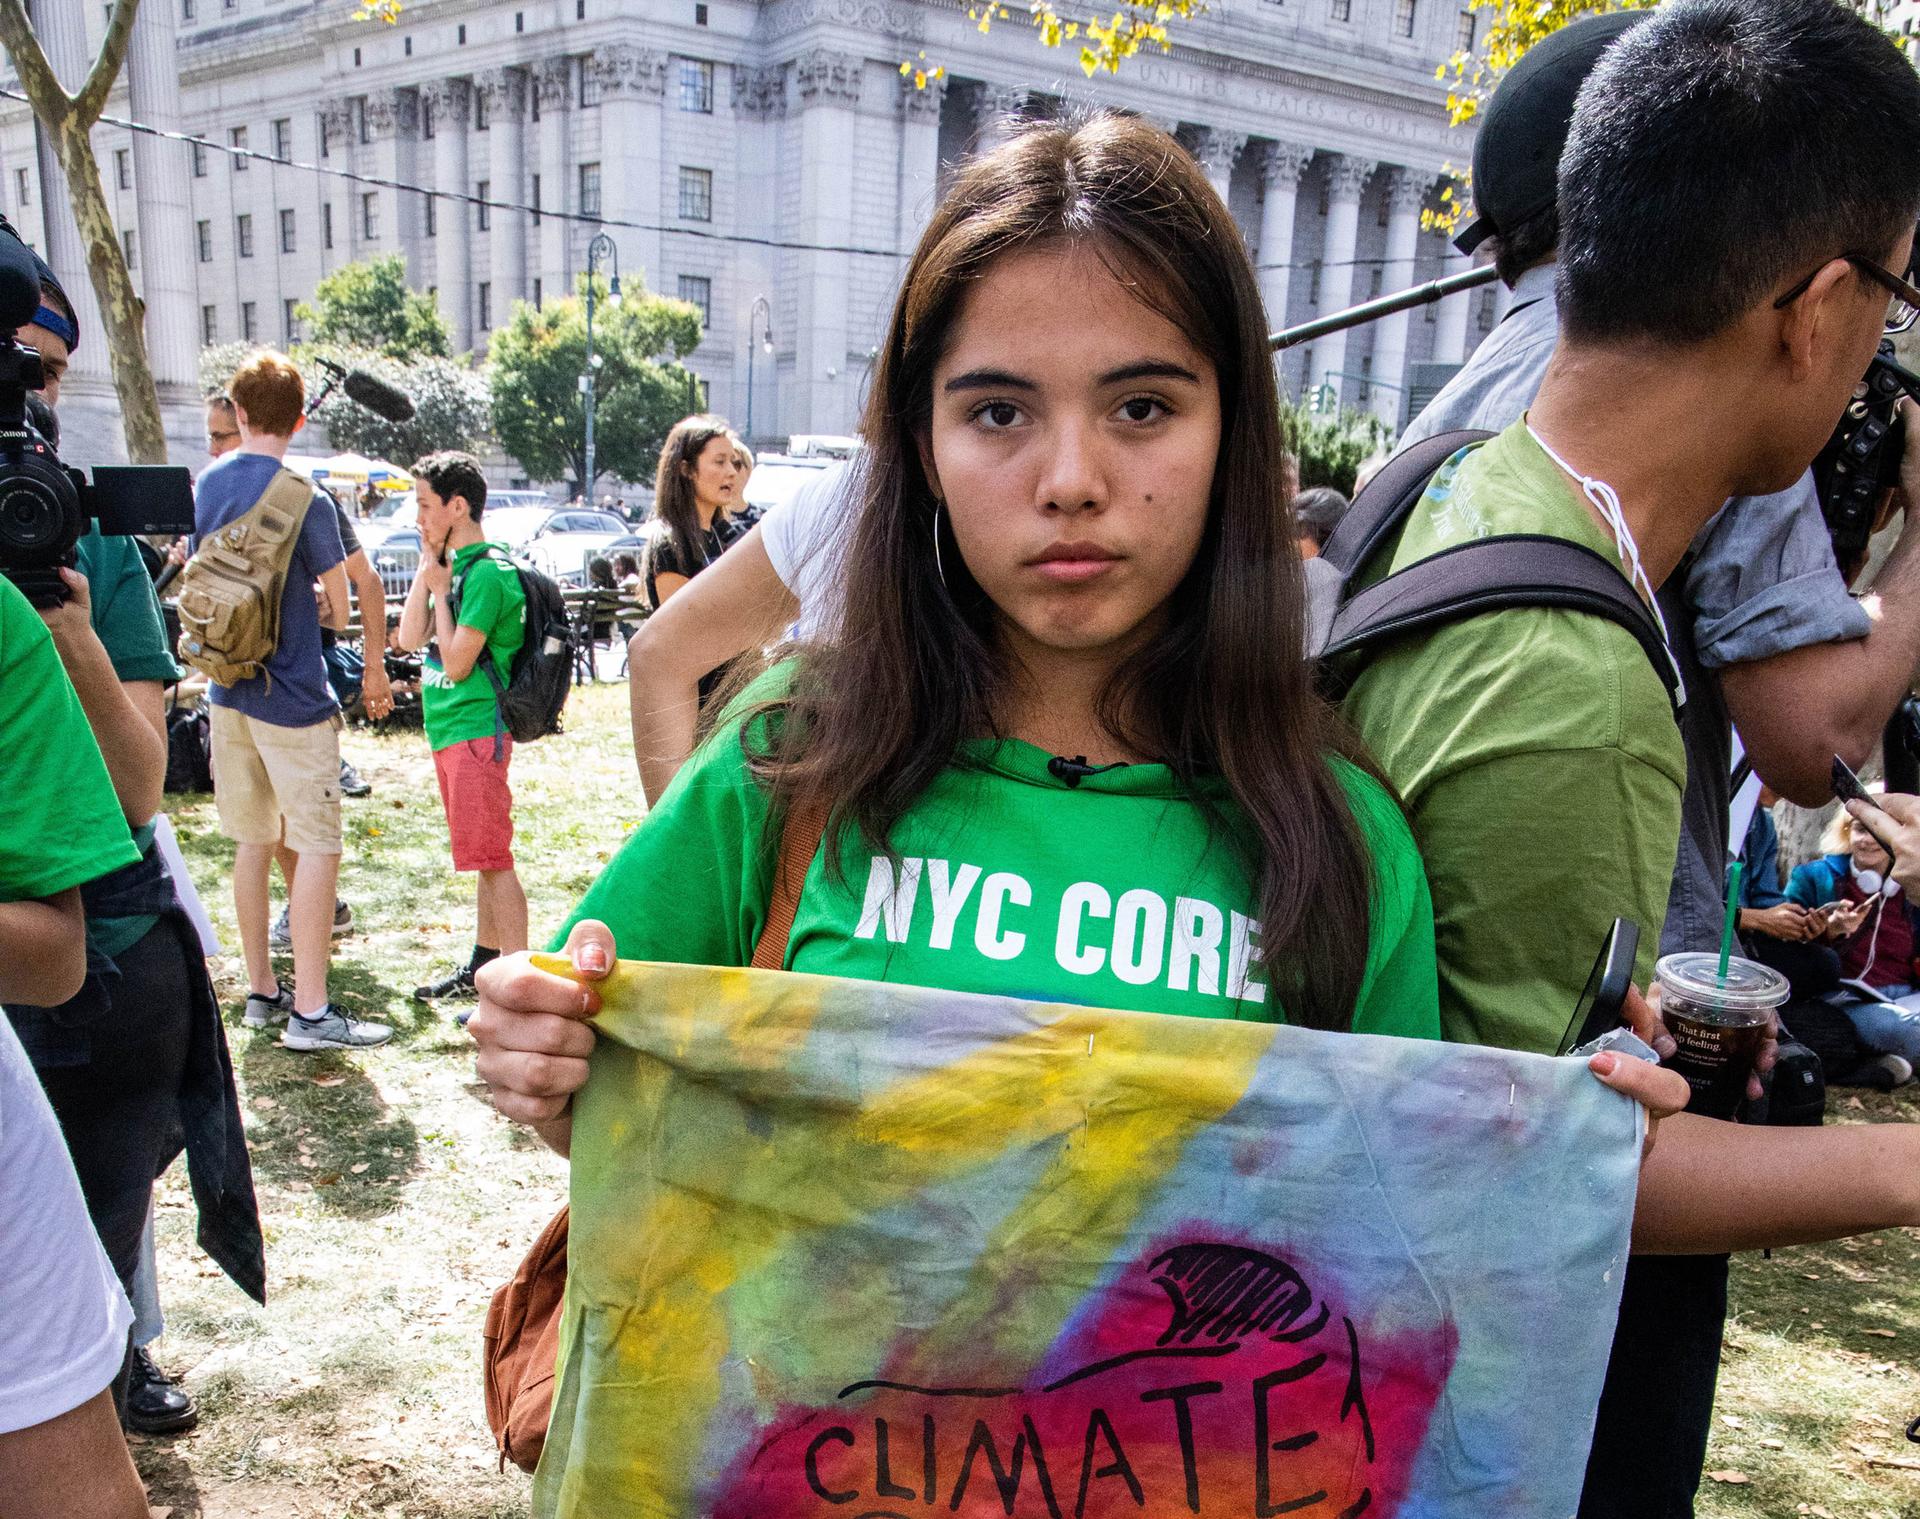 Xiye Bastida is shown standing with a green sweatshirt on and holding a sign with the word, "Climate," written on it.